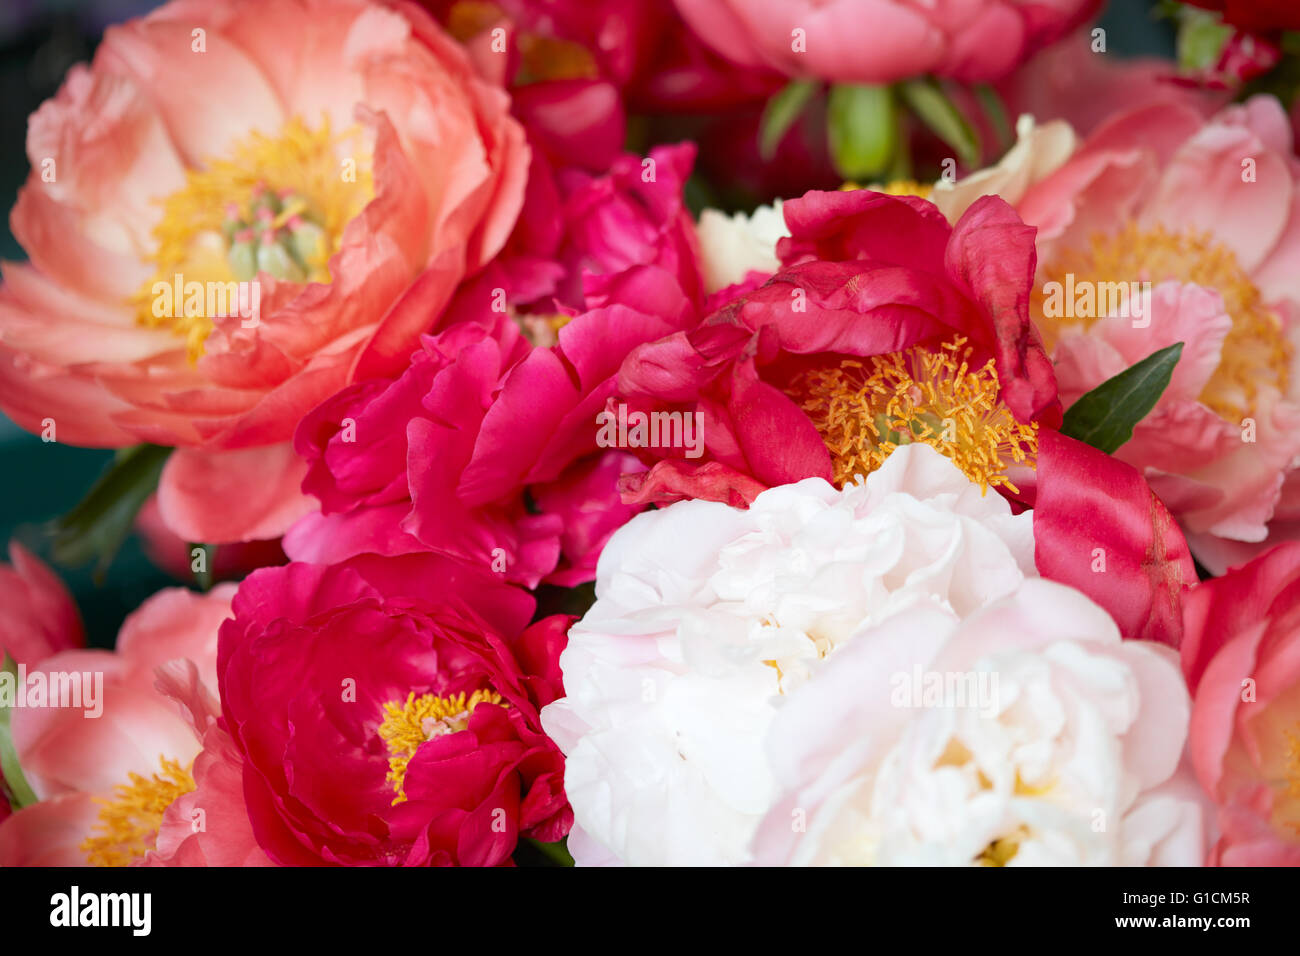 Peony flowers in red, pink and white colors background Stock Photo